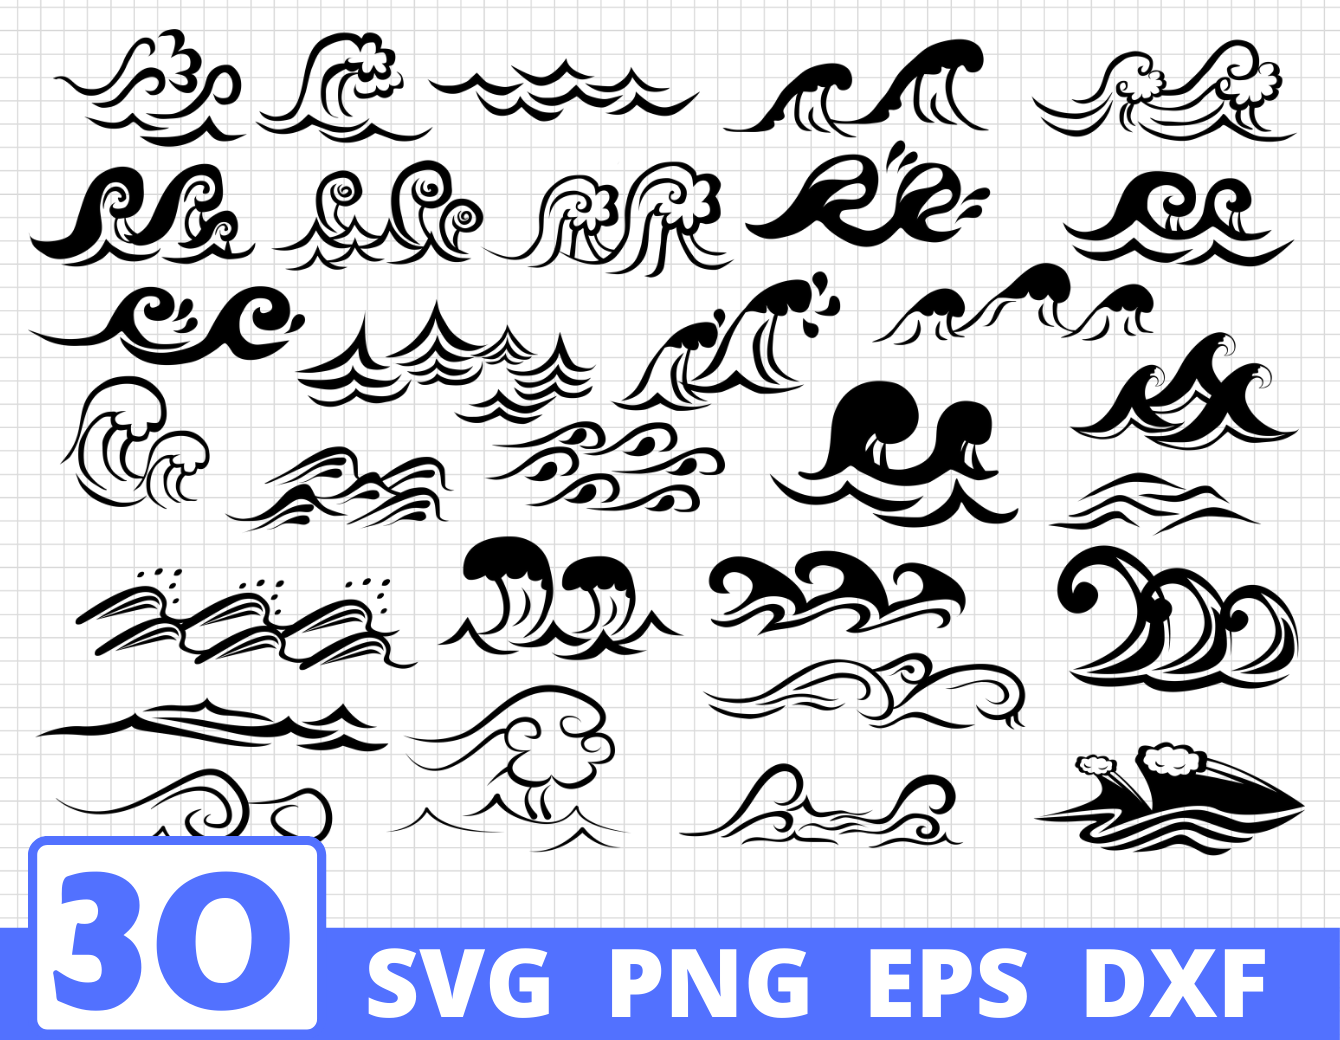 Download WAVES SILHOUETTE SVG BUNDLE | Wave clipart | Wave cut file By SvgOcean | TheHungryJPEG.com